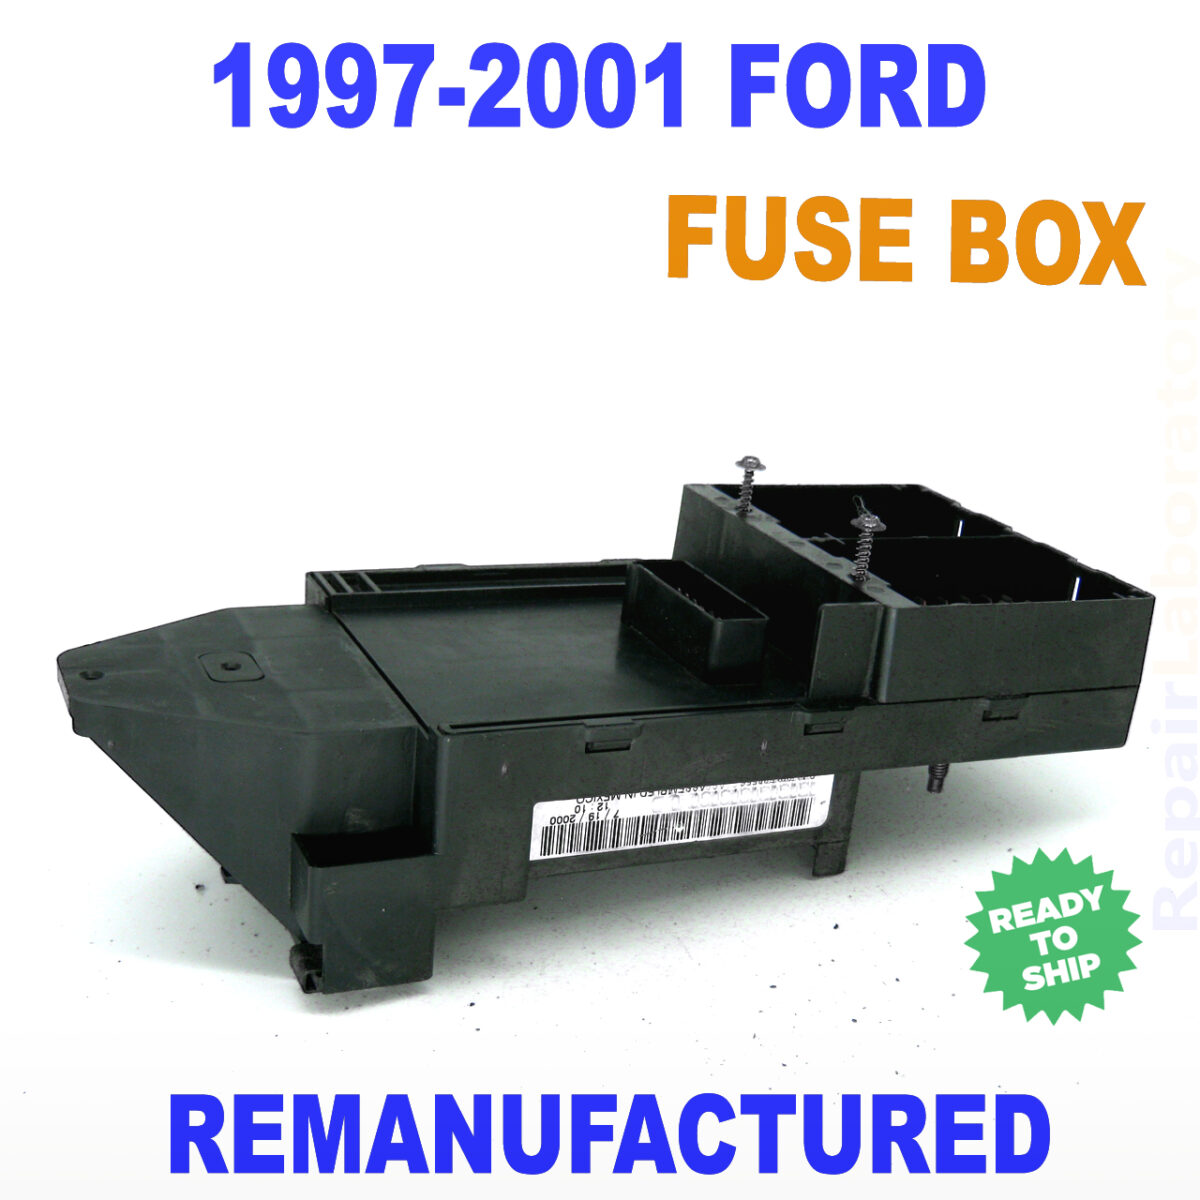 97-01_ford_f150-f350_fuse_box_revers_remanufactured